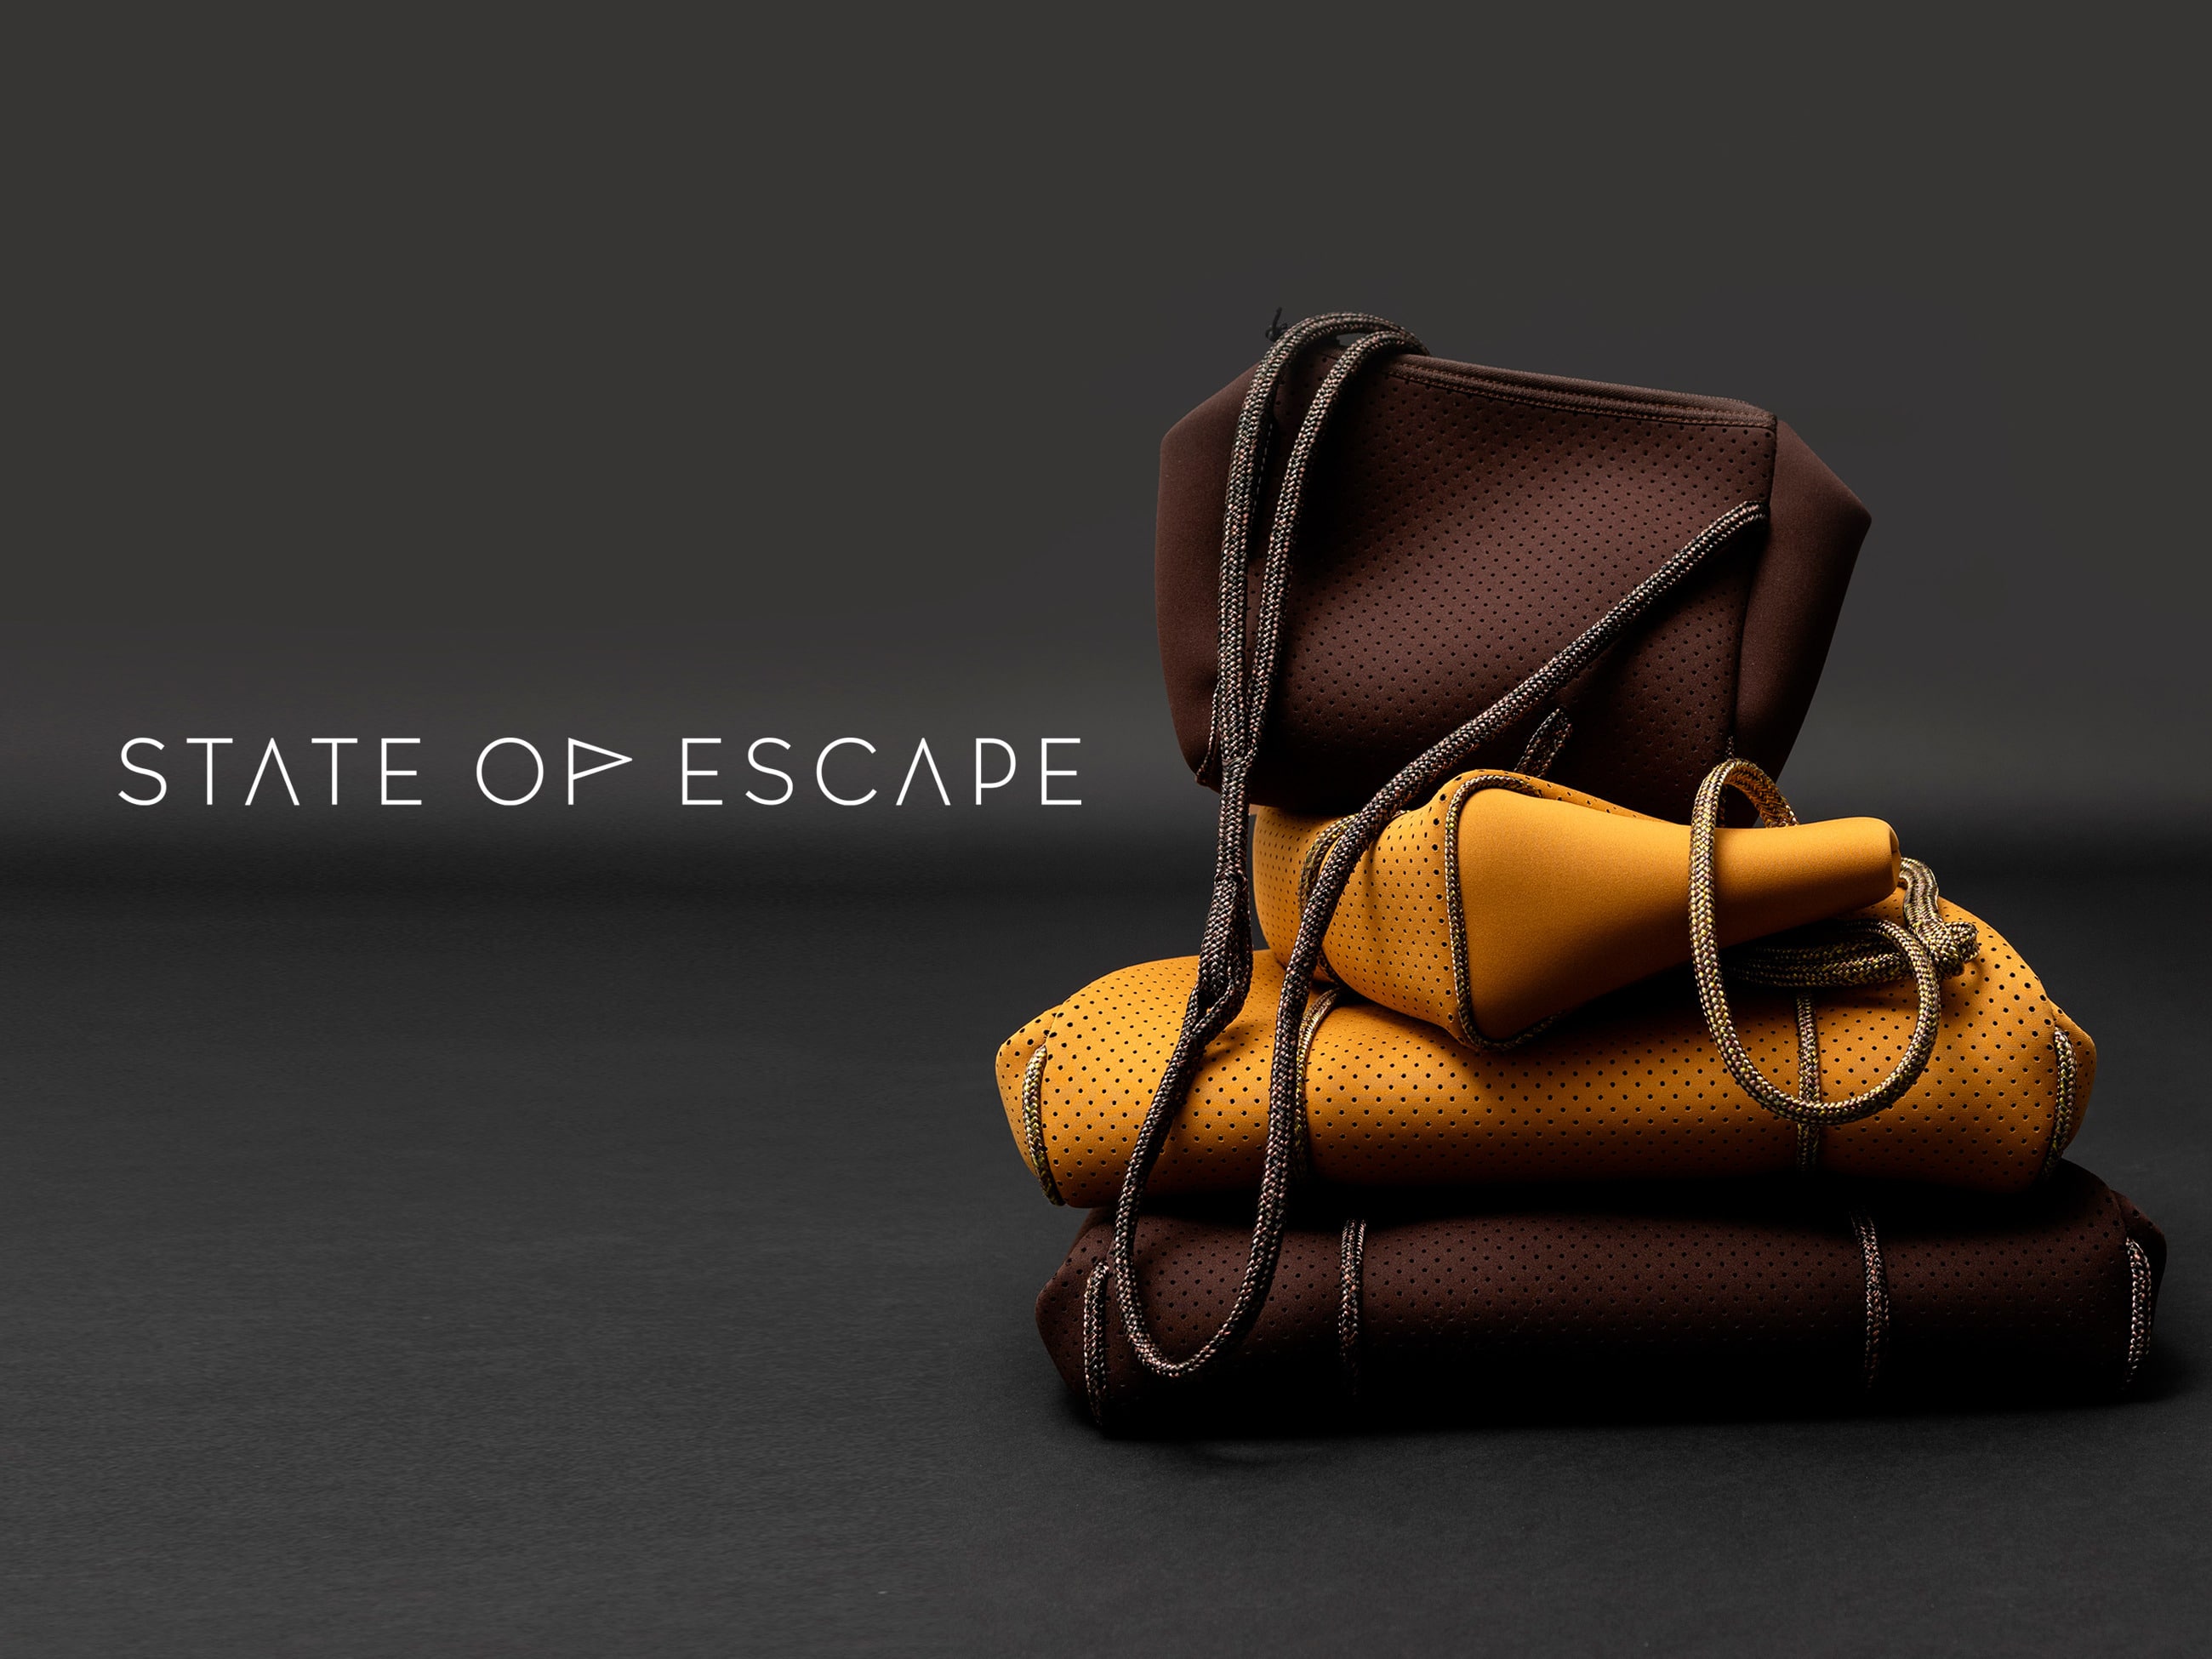 STATE OF ESCAPE close up event for women